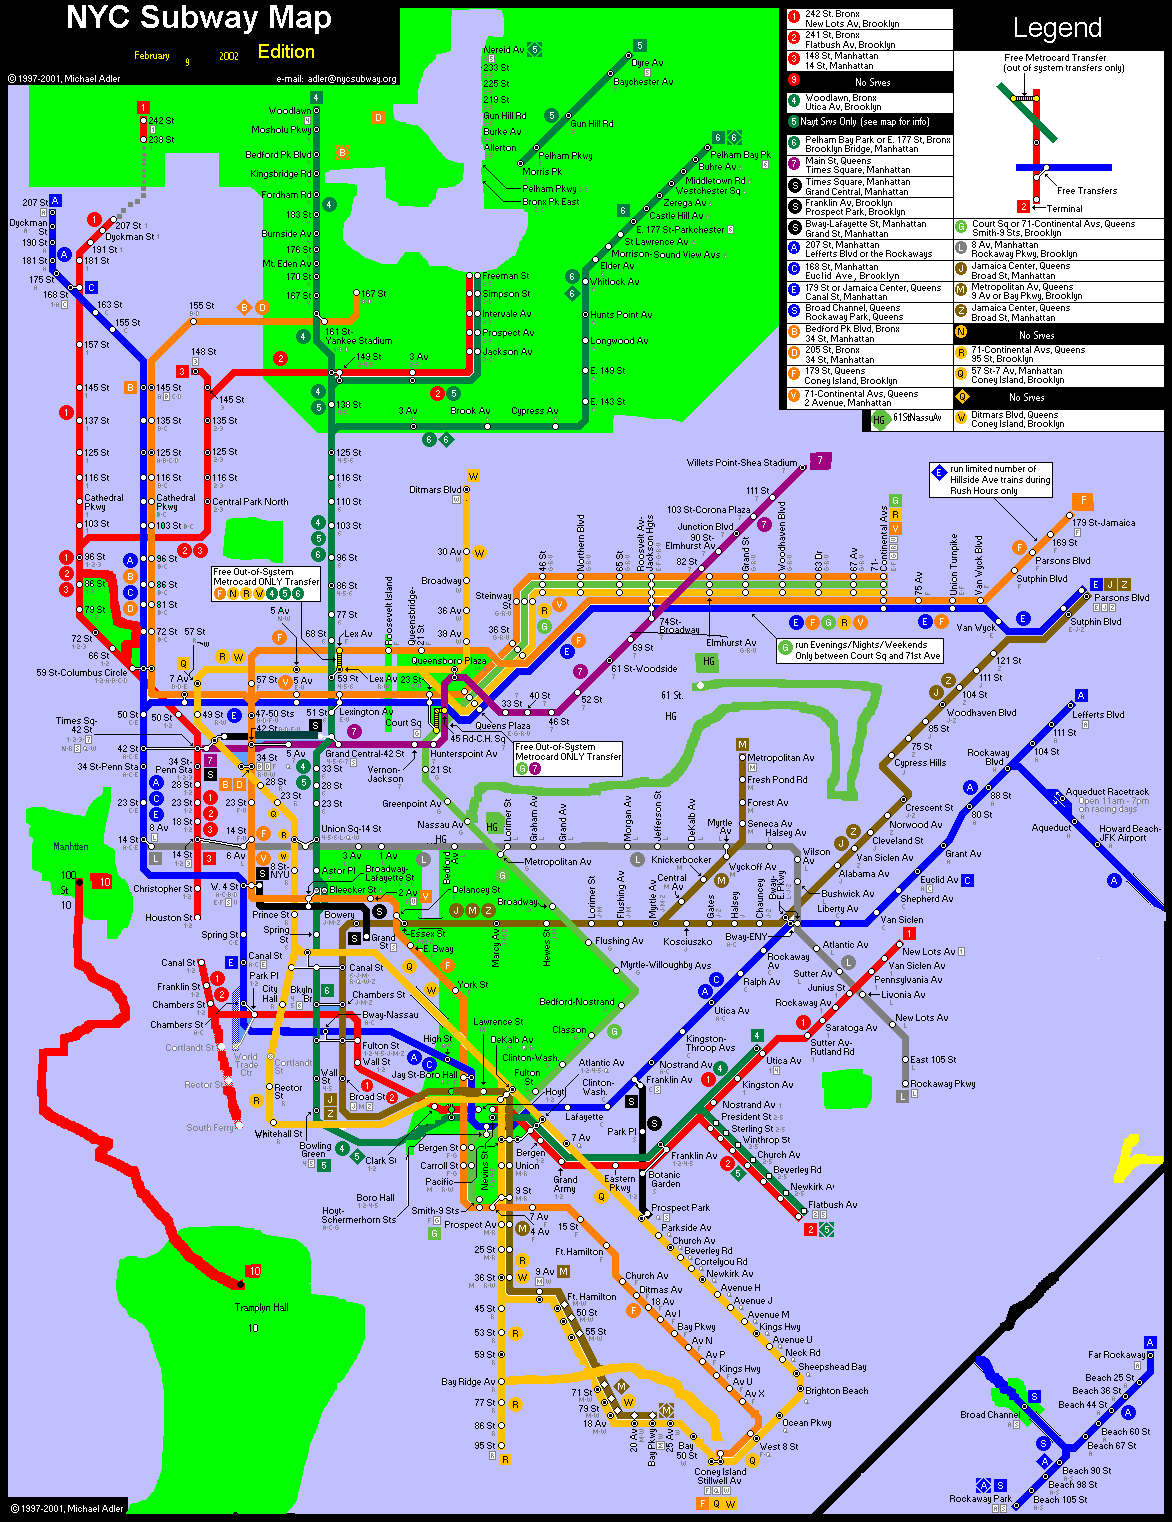 map of the New York subway with some changes